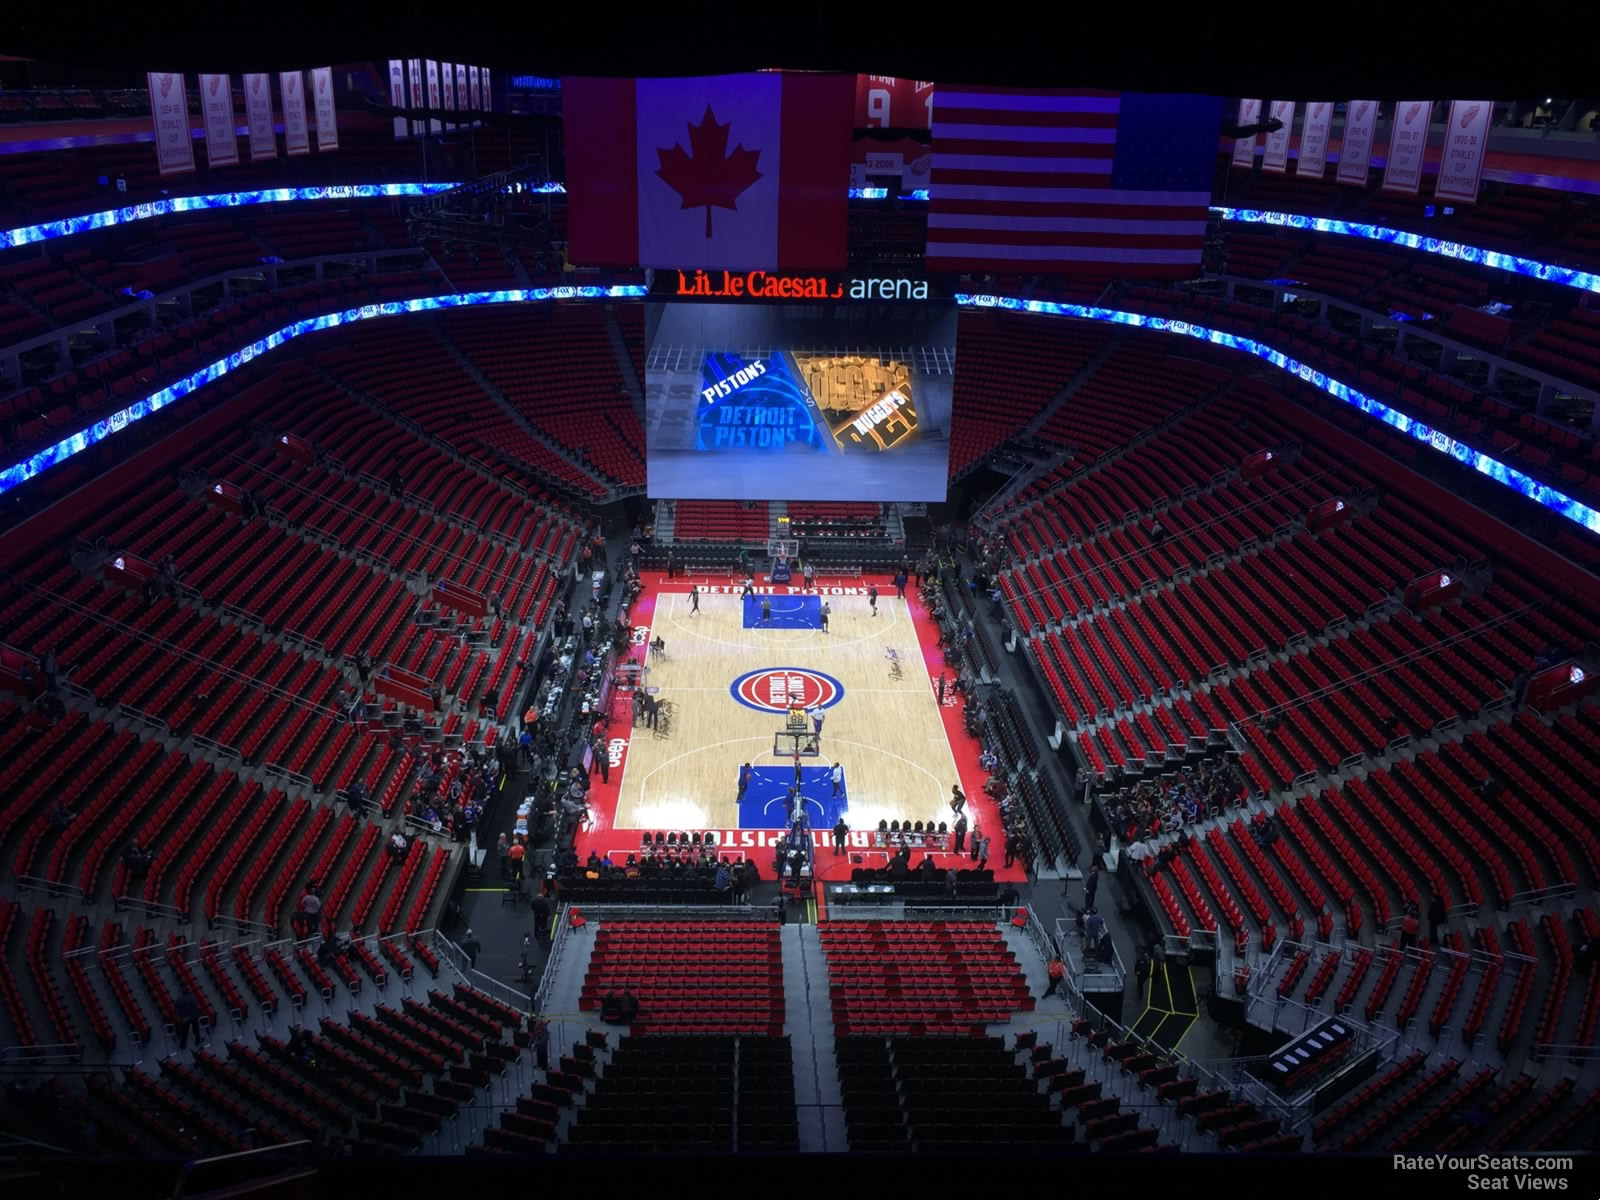 section 219, row 11 seat view  for basketball - little caesars arena